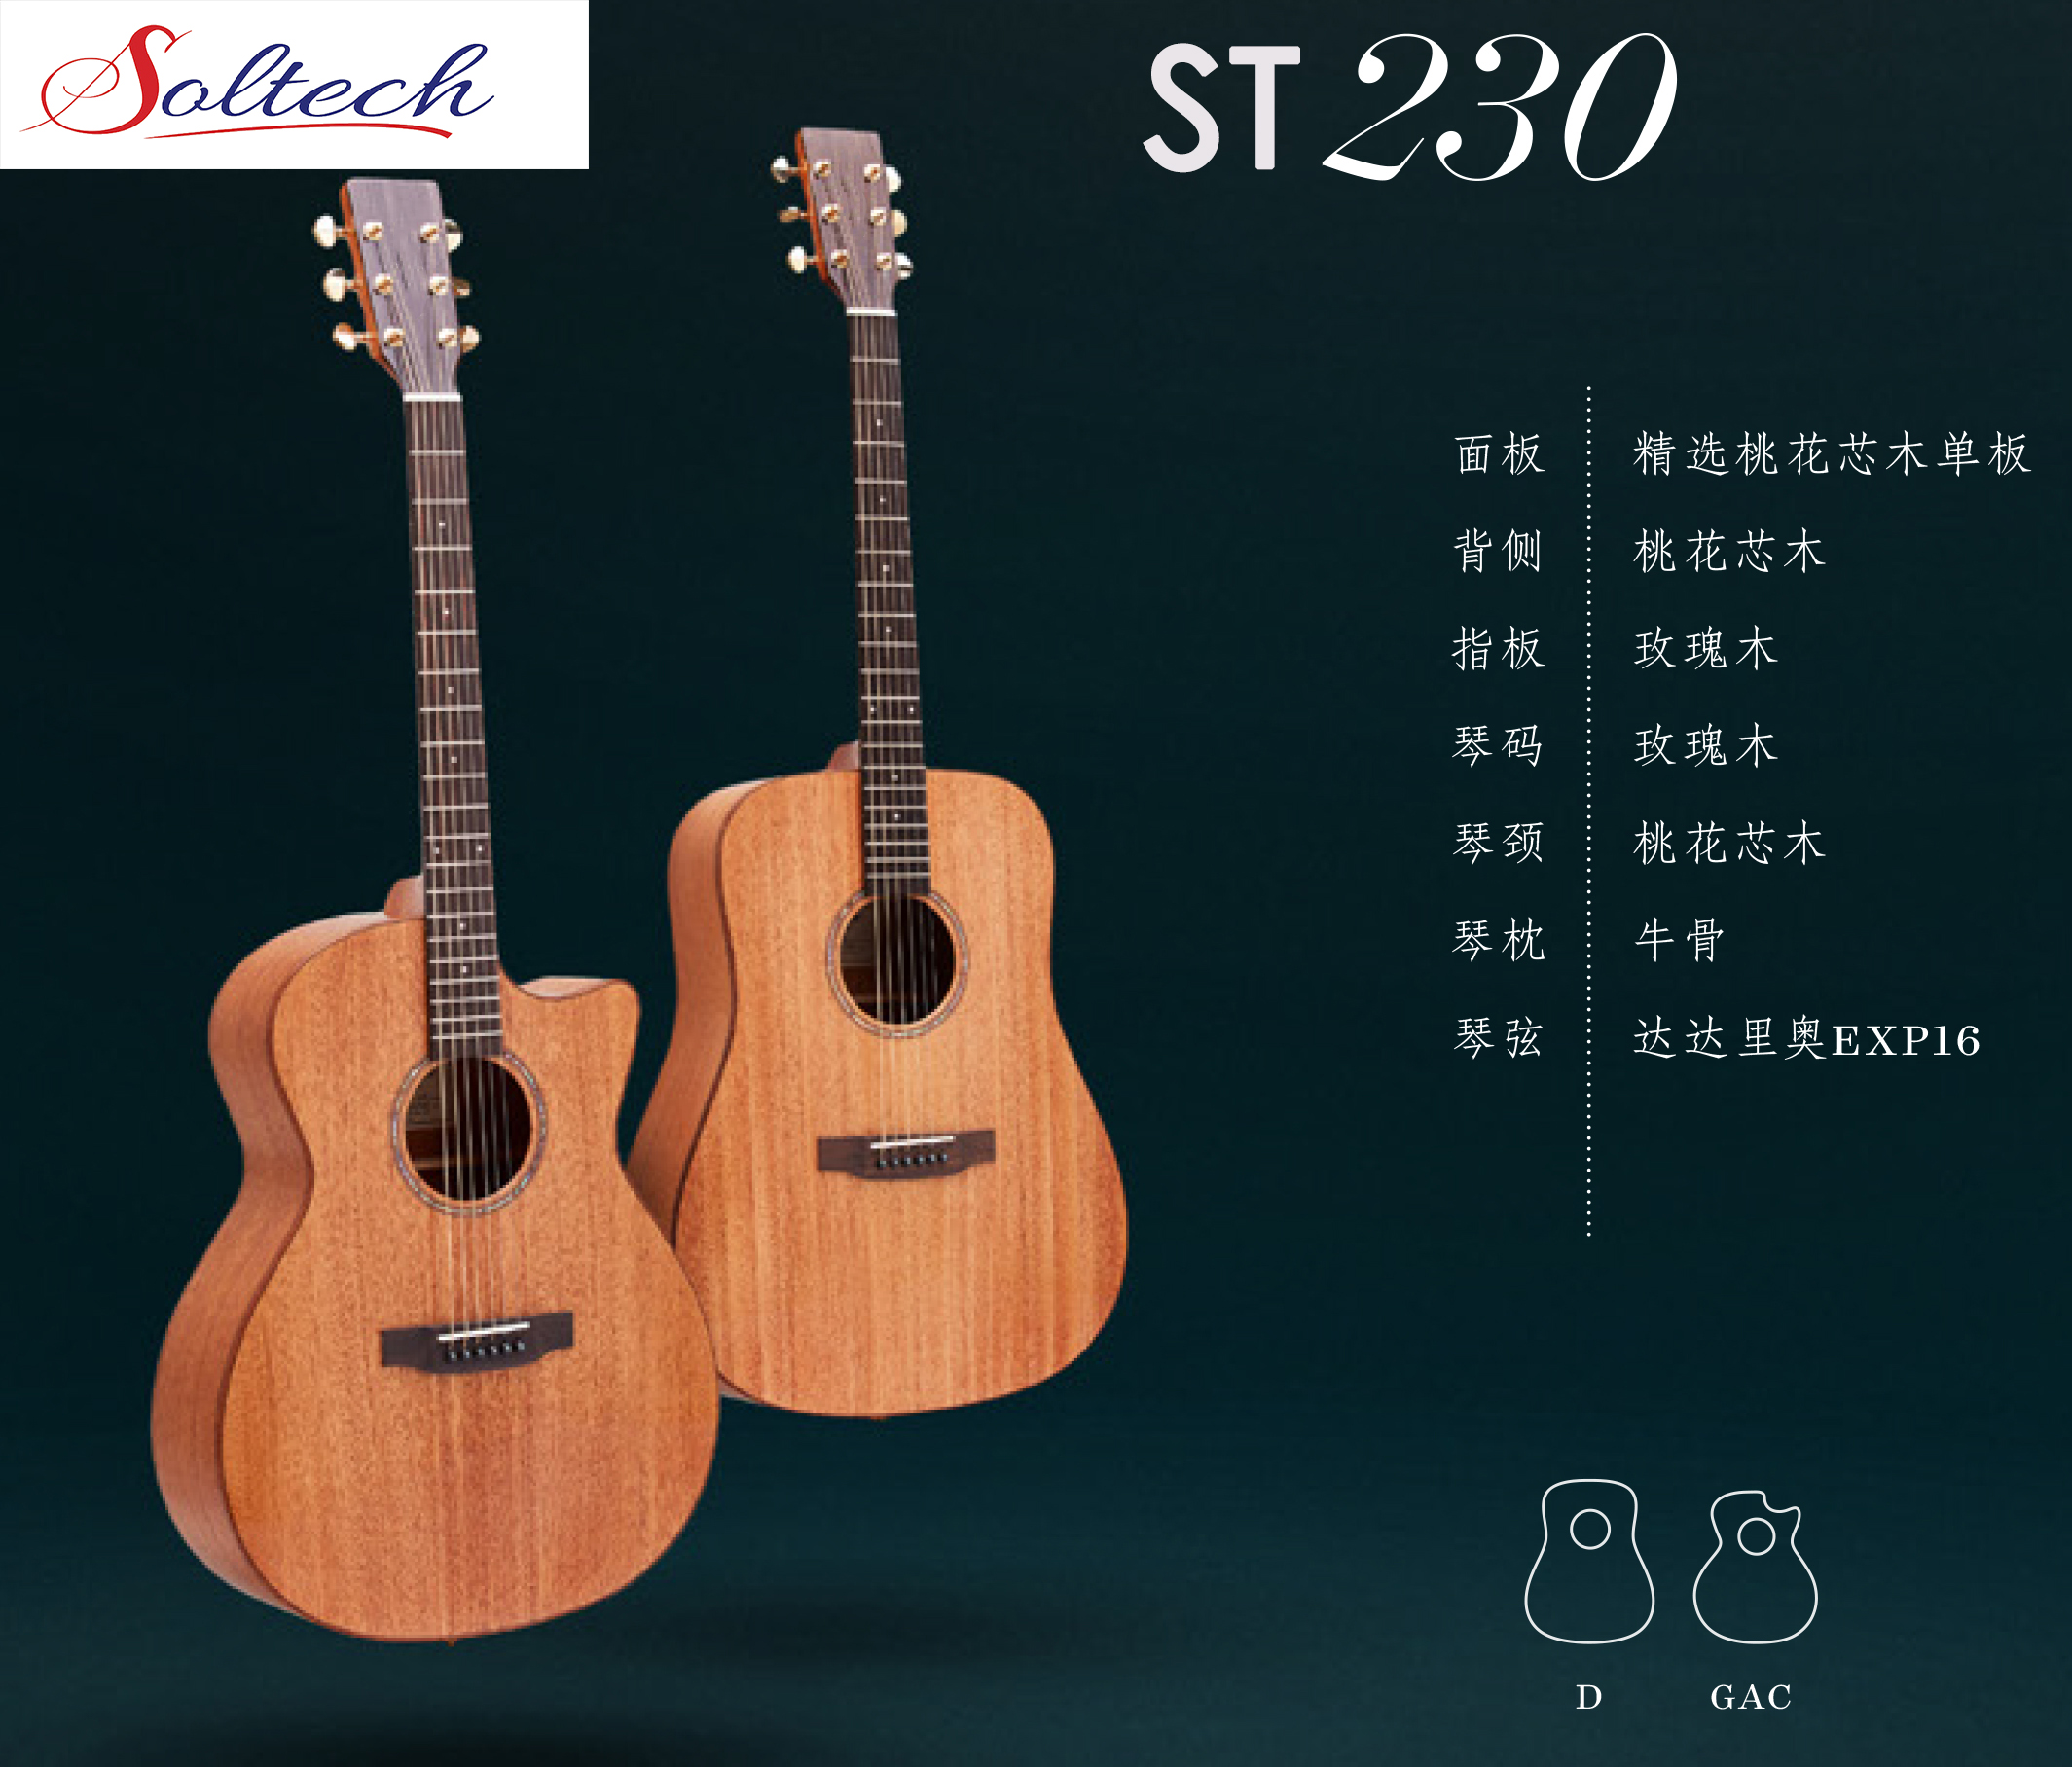 ST230 acoustic guitar with Top &Back Mahogany - Guizhou Soltech 